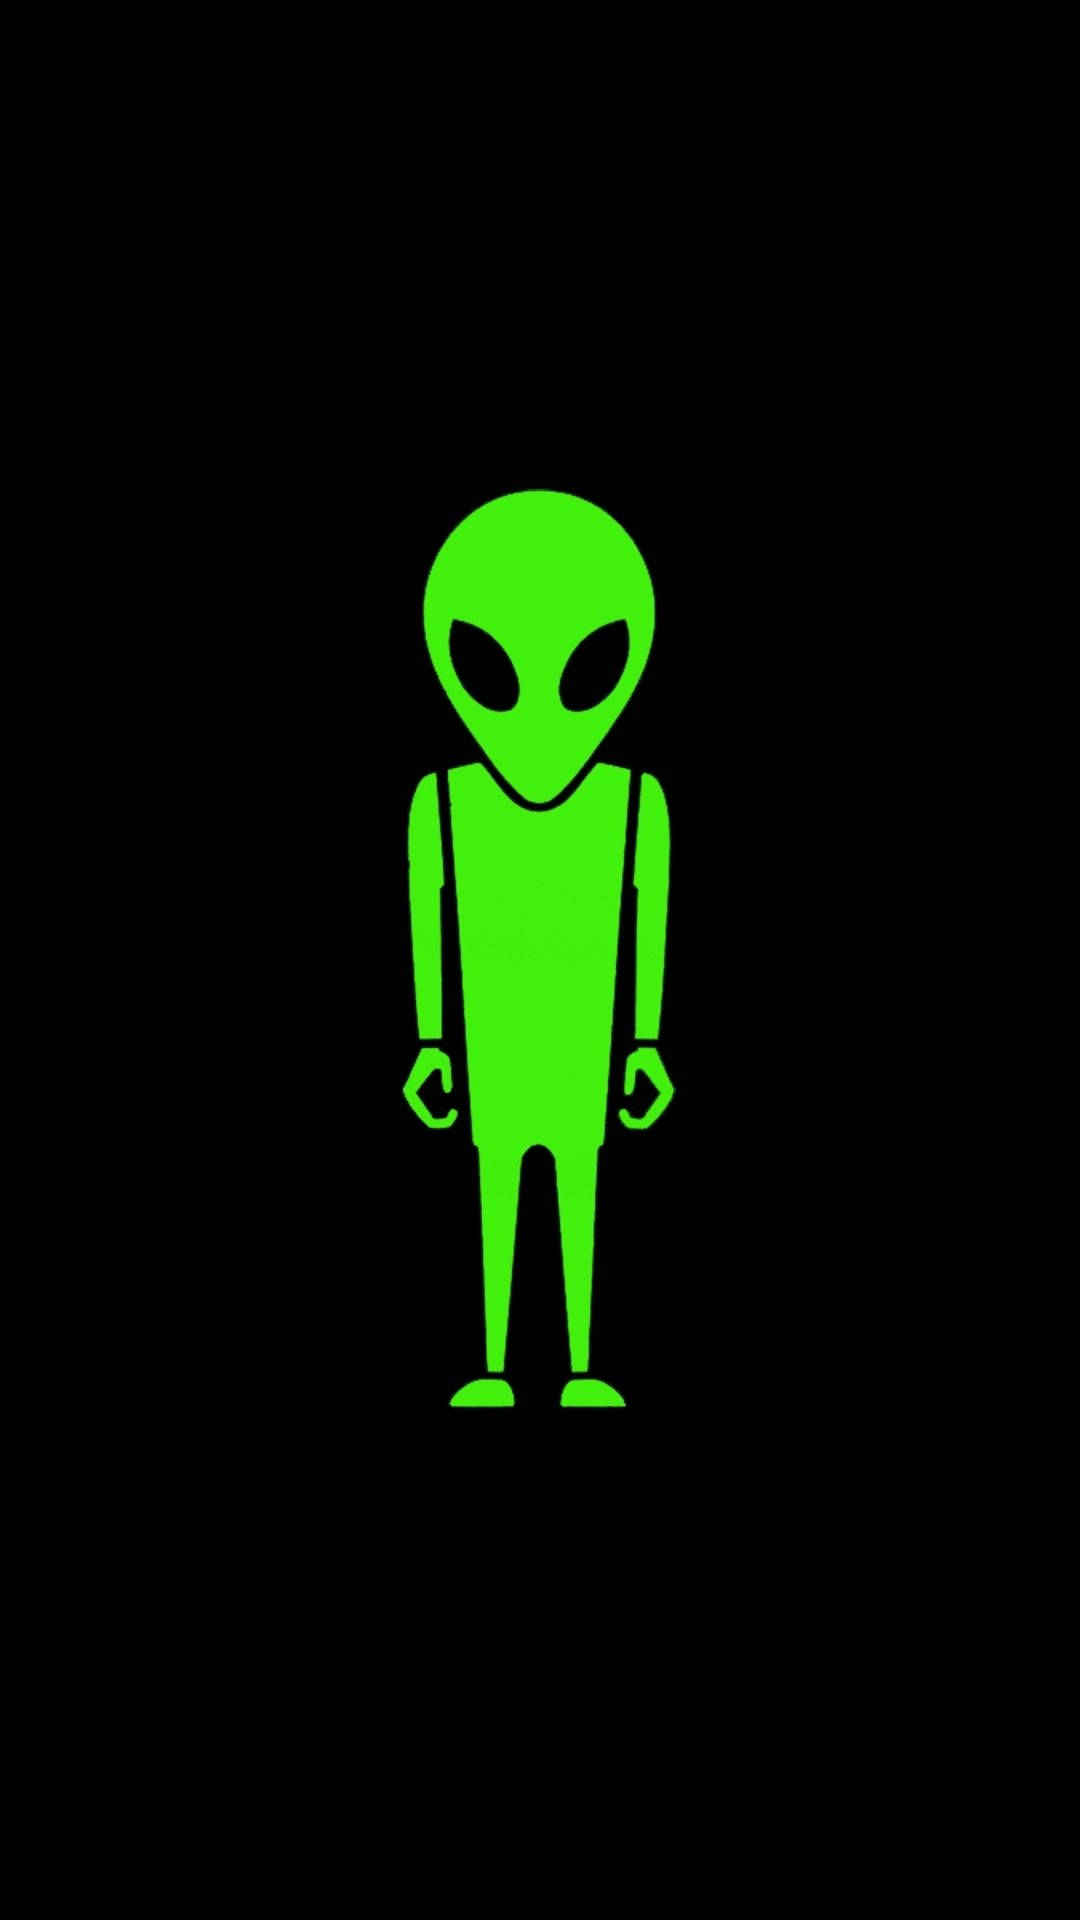 A Light Green Alien in a Fascinating and Otherworldly Landscape Wallpaper